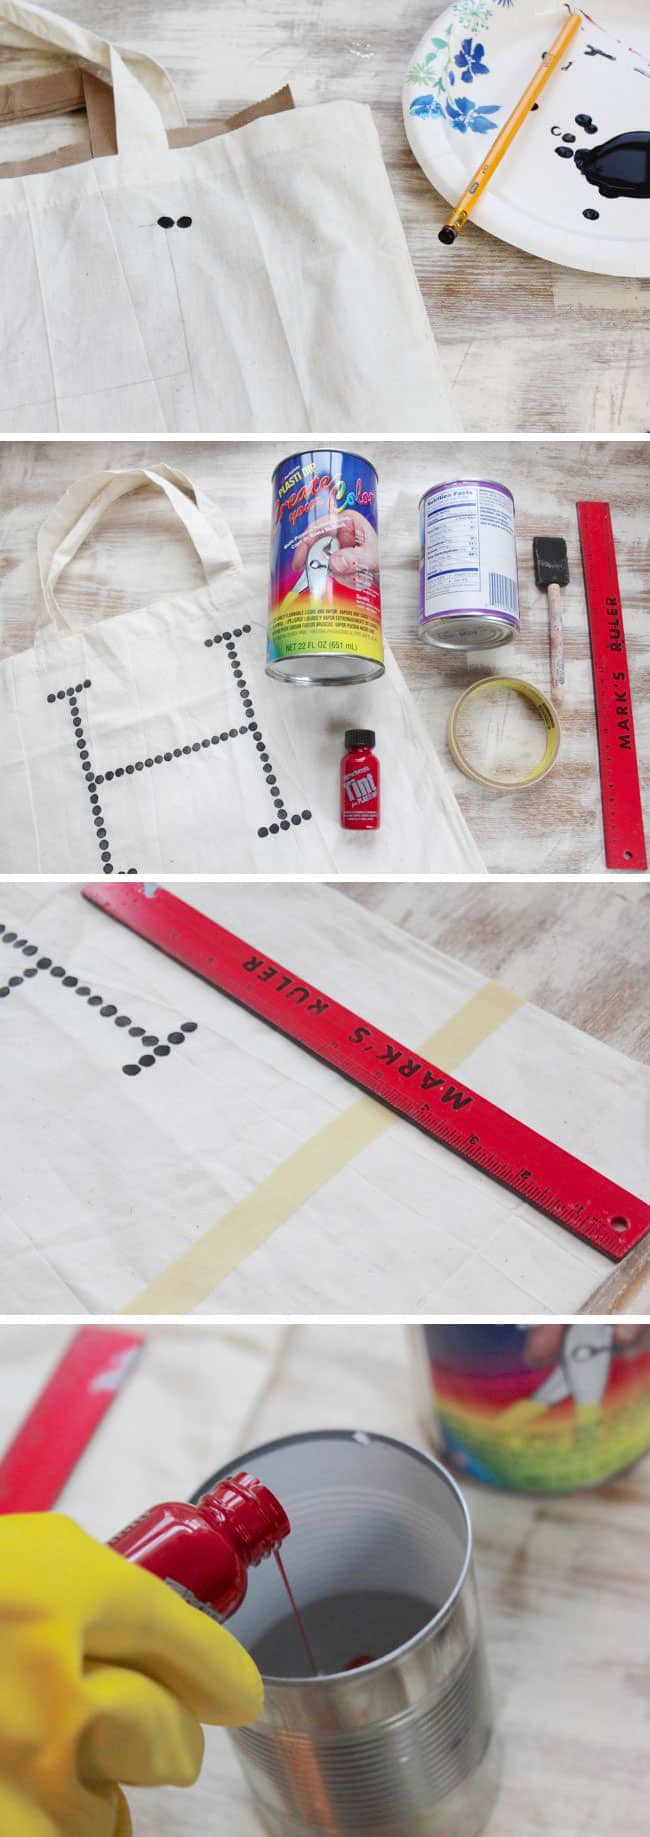 how to make tote bag with plasti dip